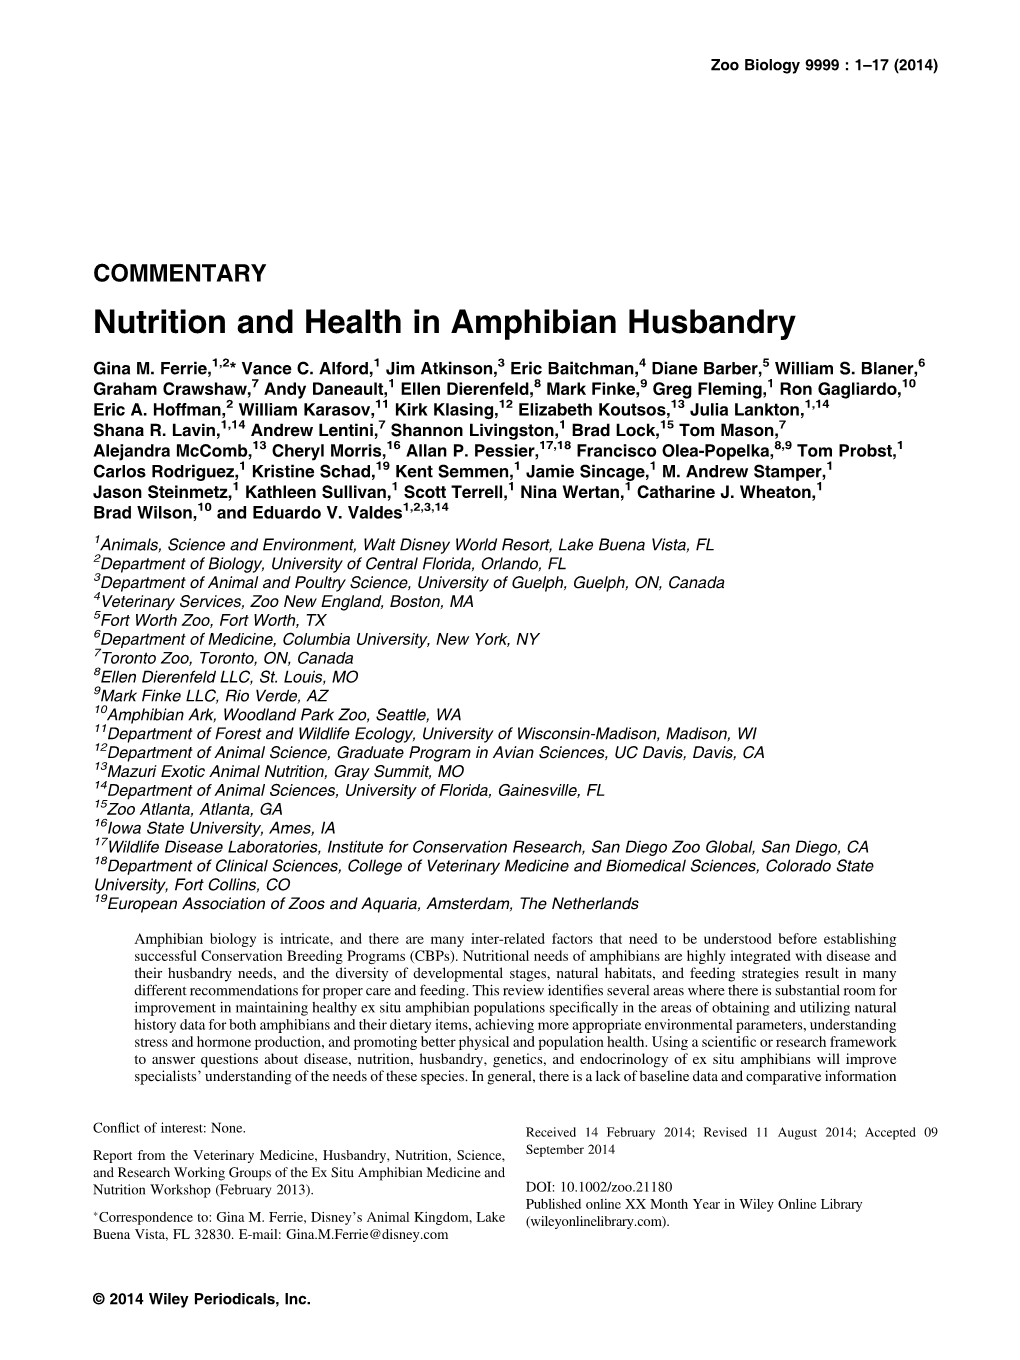 Nutrition and Health in Amphibian Husbandry